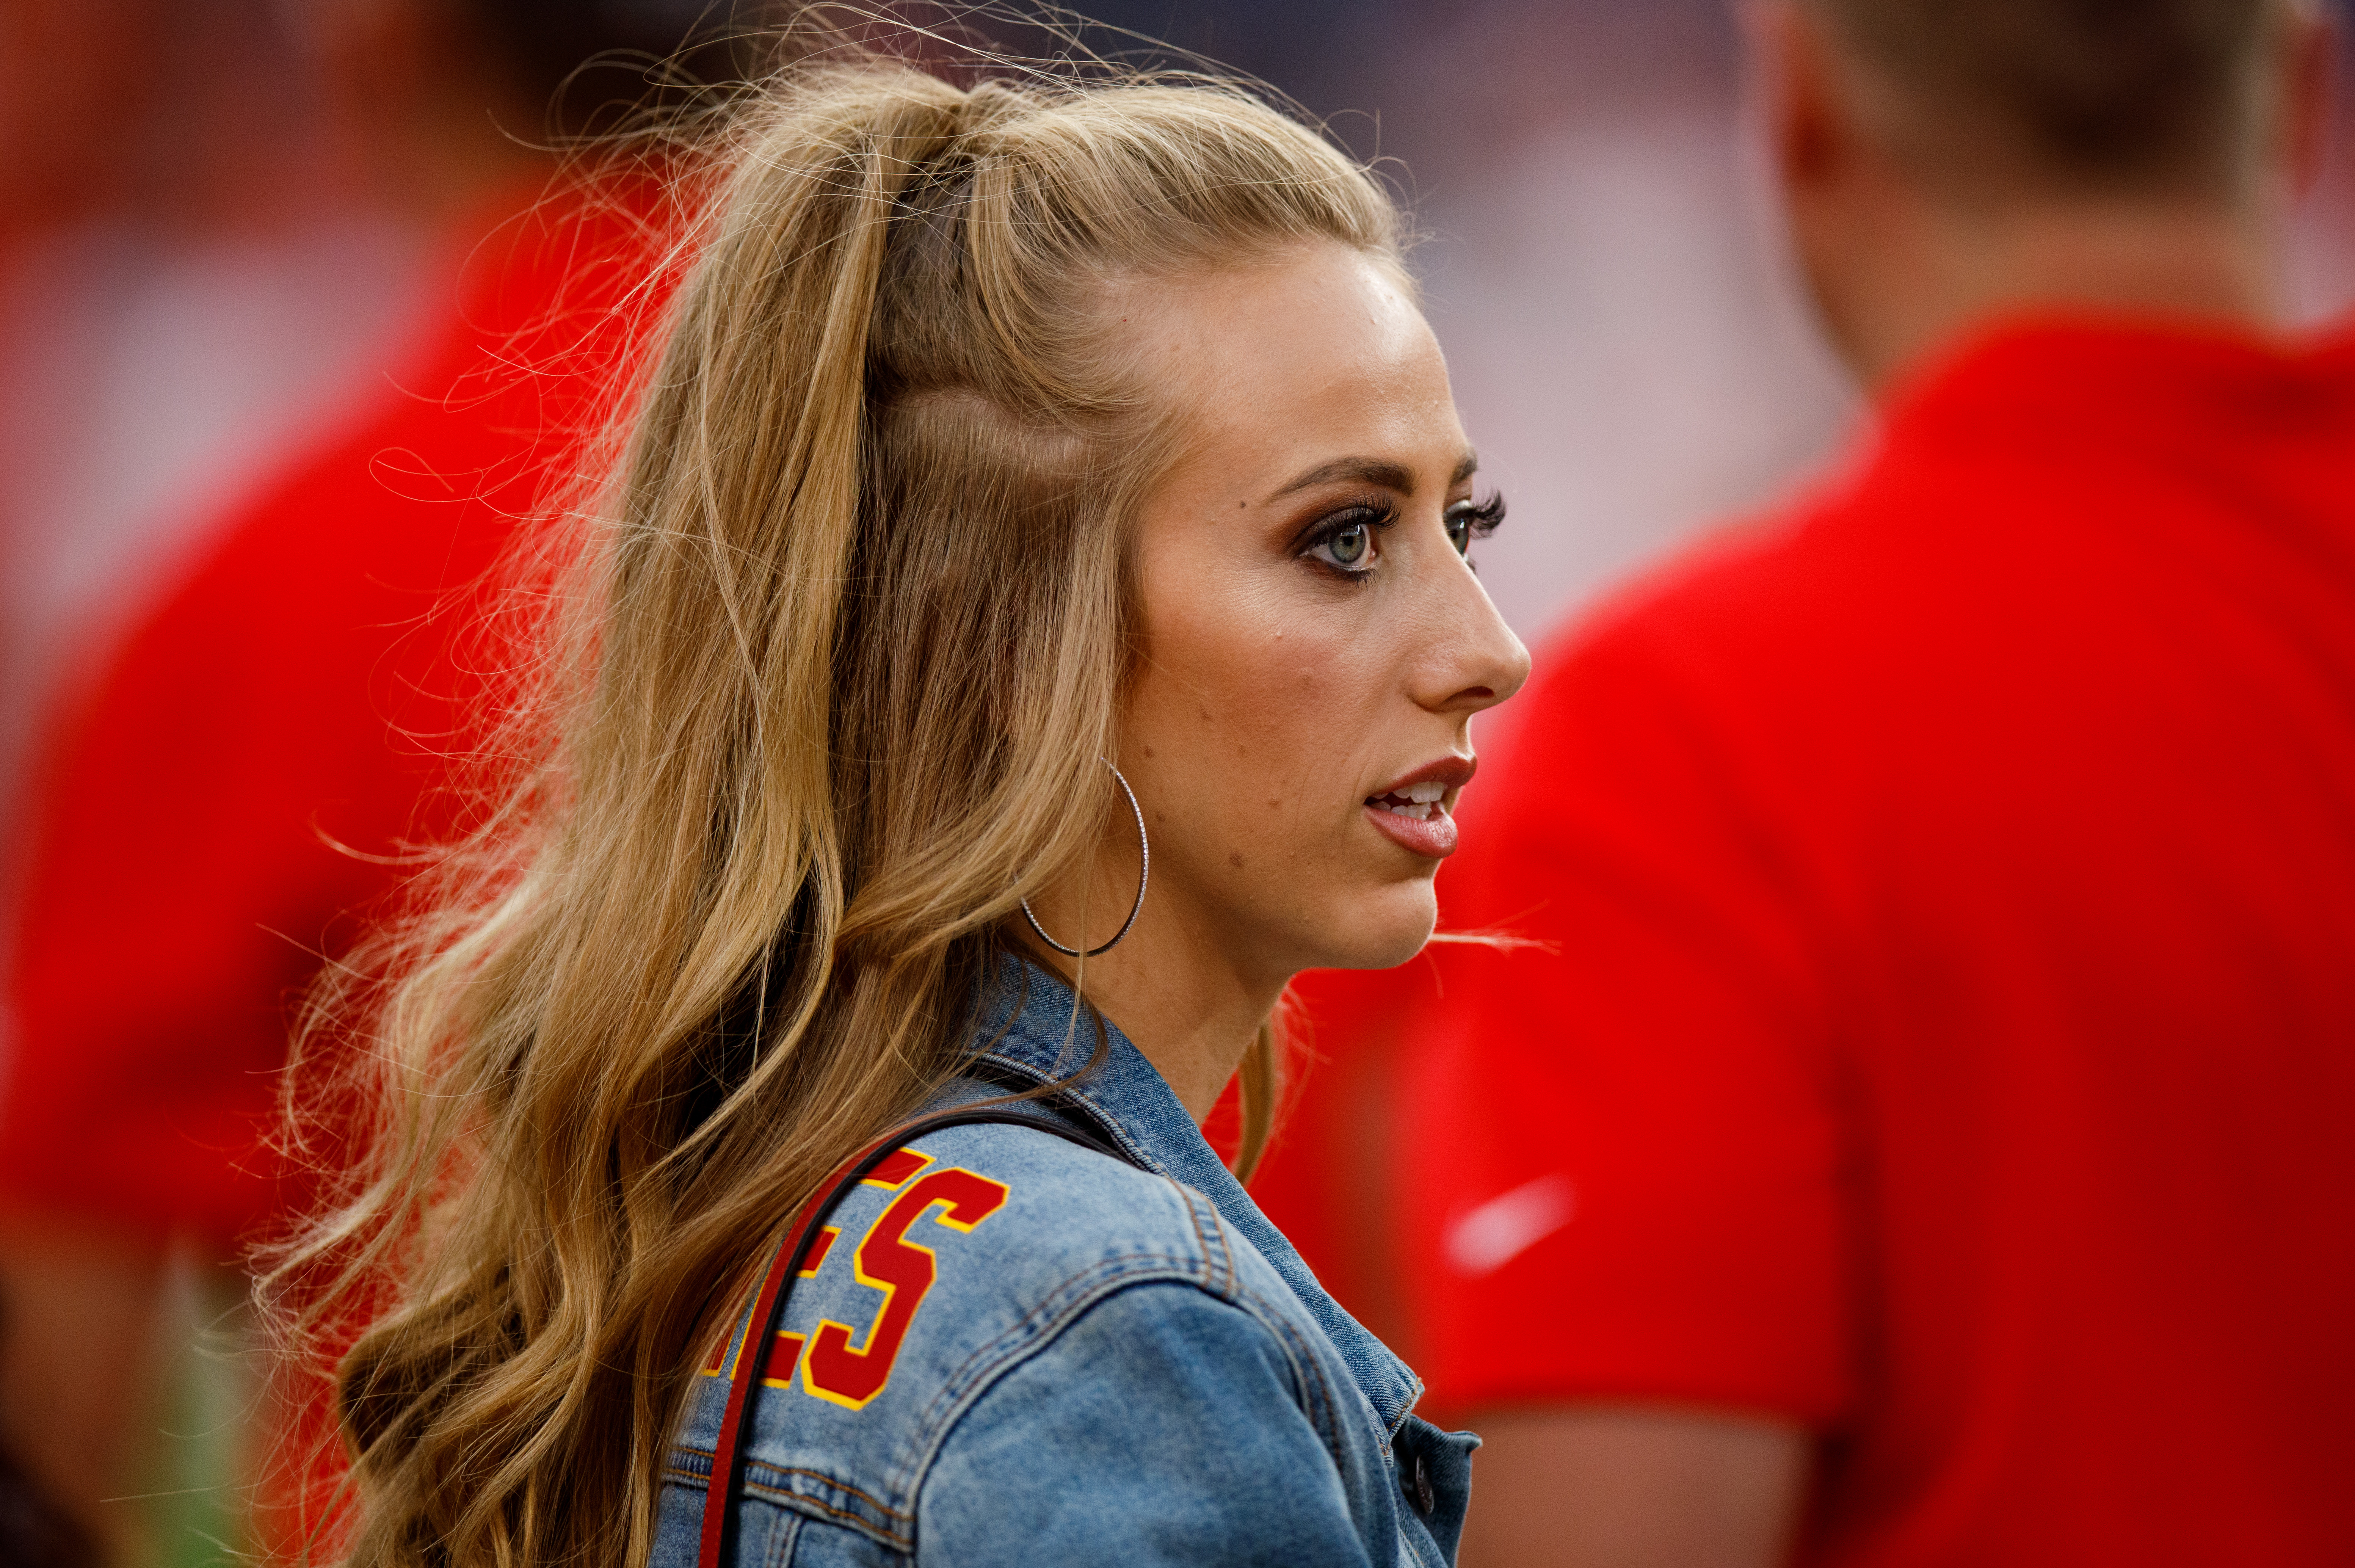 Brittany Matthews says Chiefs 'got screwed' after loss